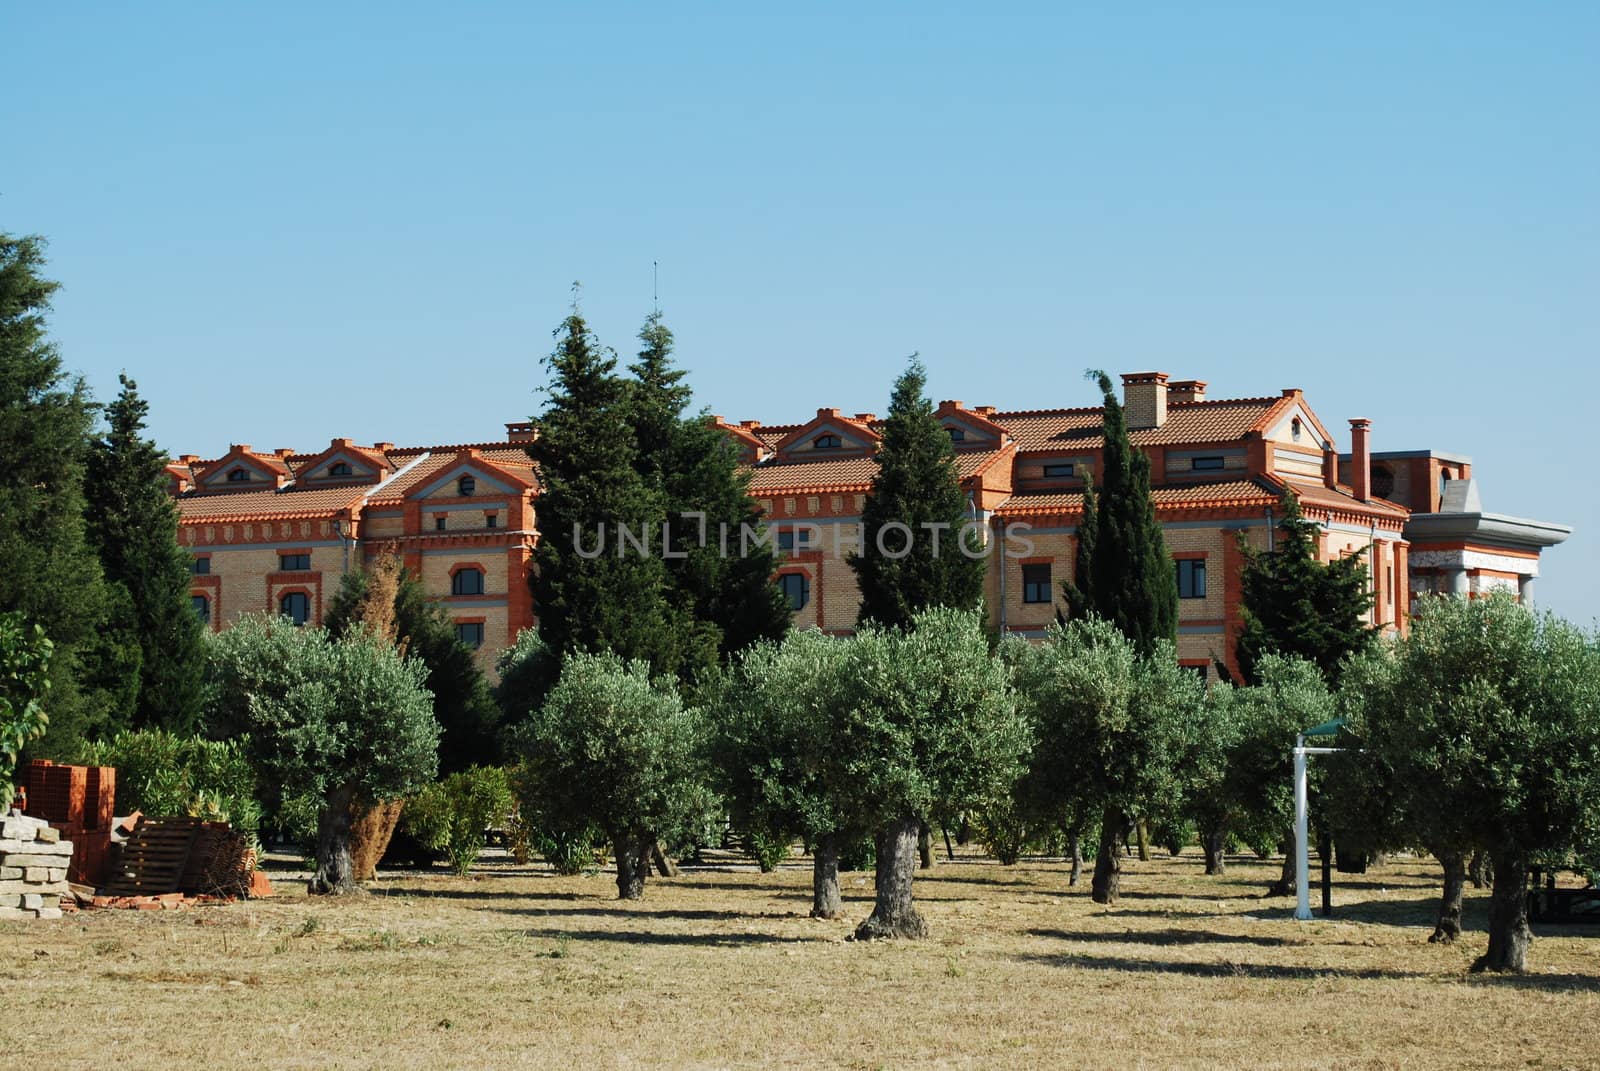 Field of Olive trees and a residential brick building by luissantos84